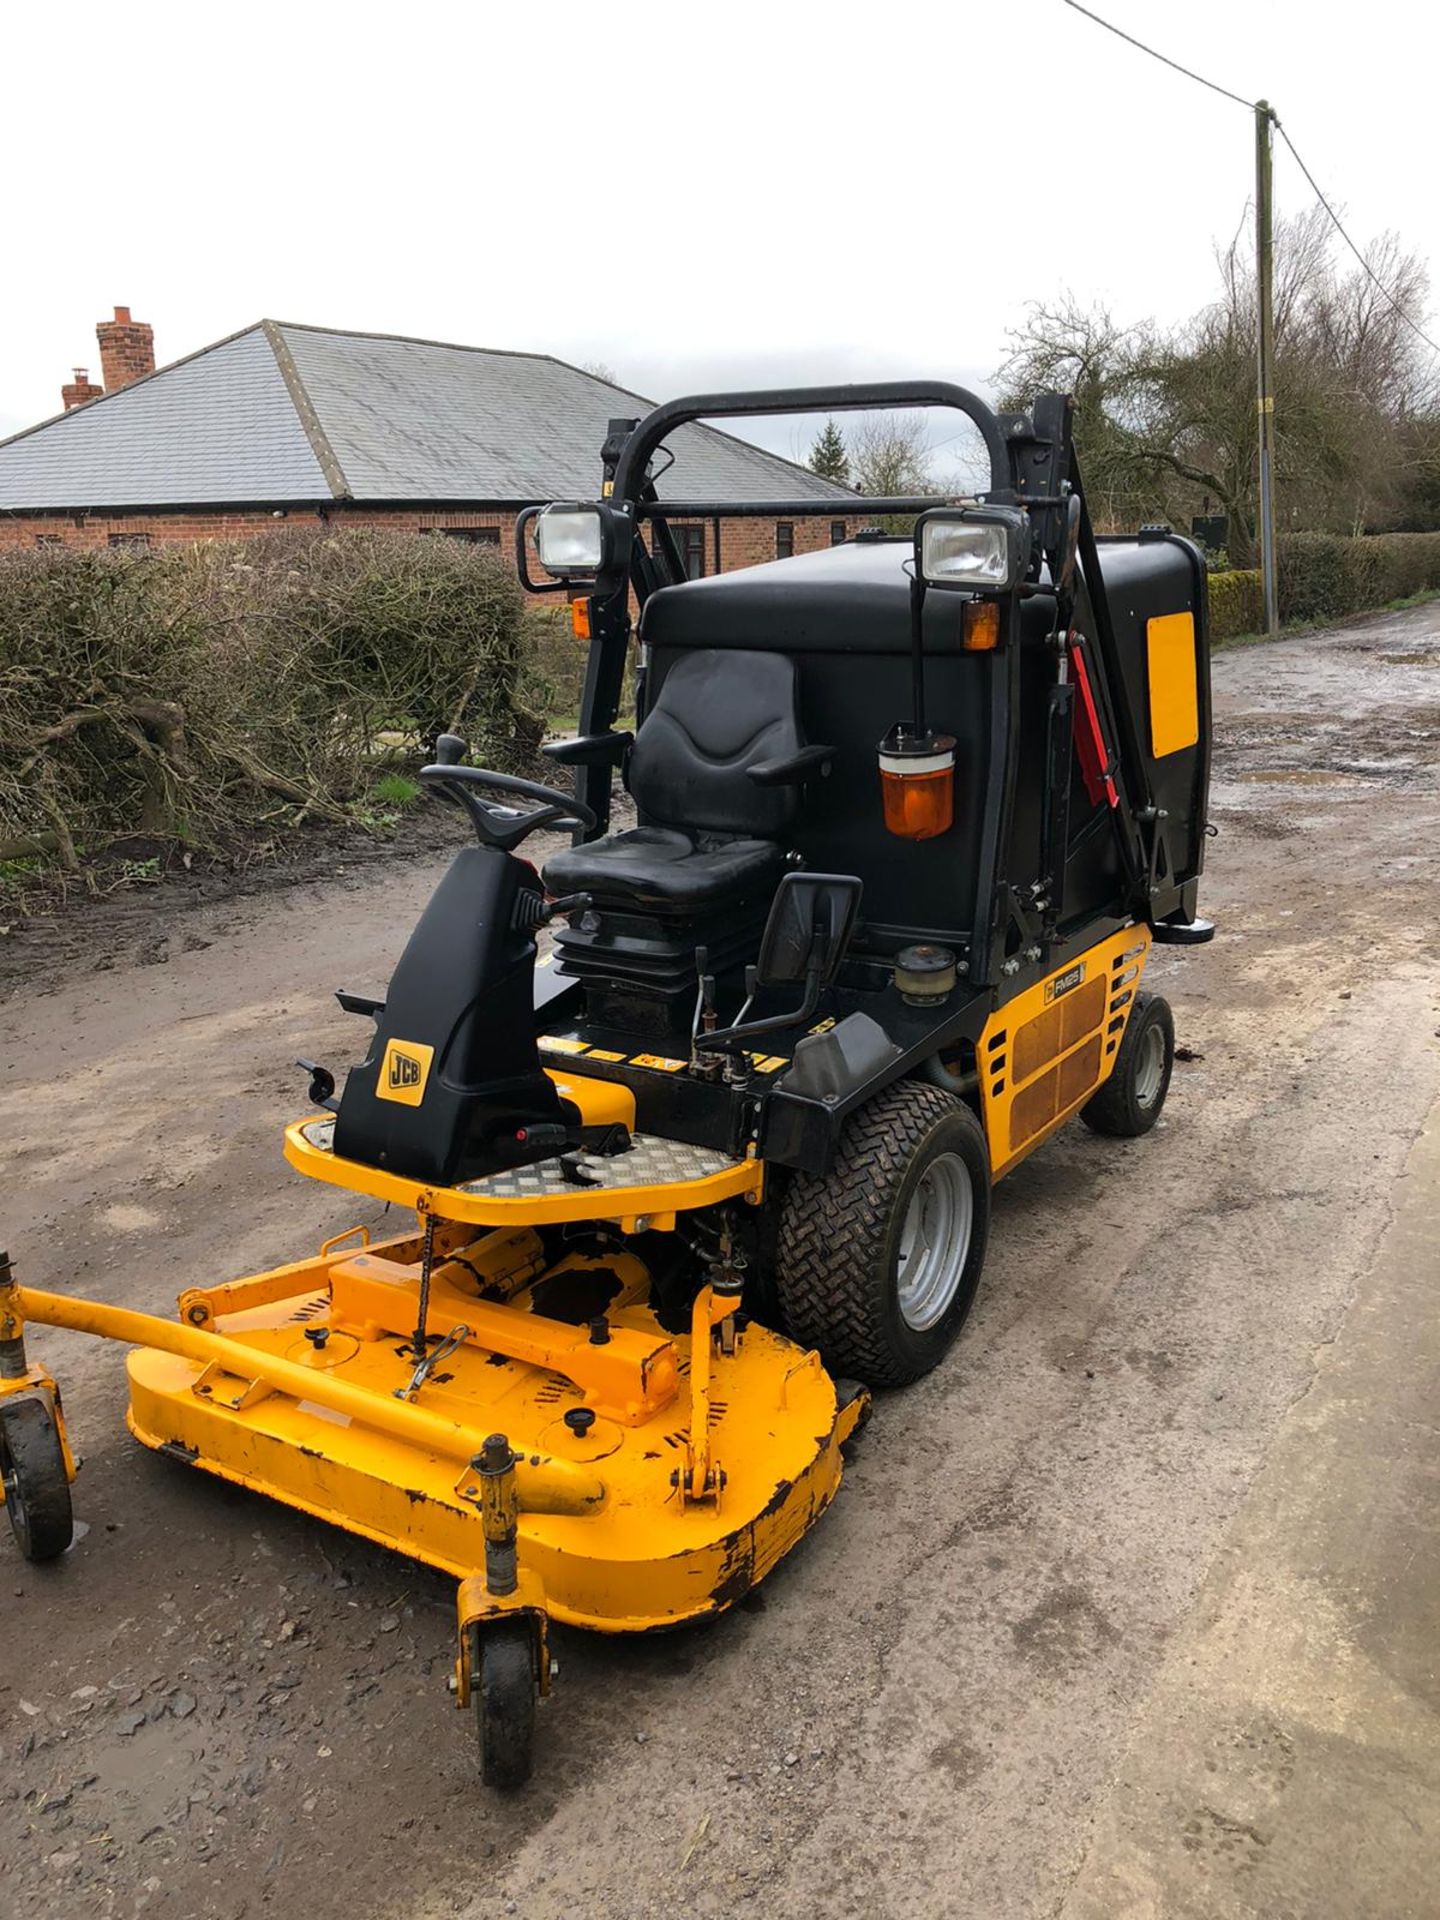 JCB FM25 RIDE ON LAWN MOWER, RUNS, WORKS, CUTS, HIGHTIP COLLECTOR, IN GOOD CONDITION, ONLY 300 HOURS - Image 2 of 5